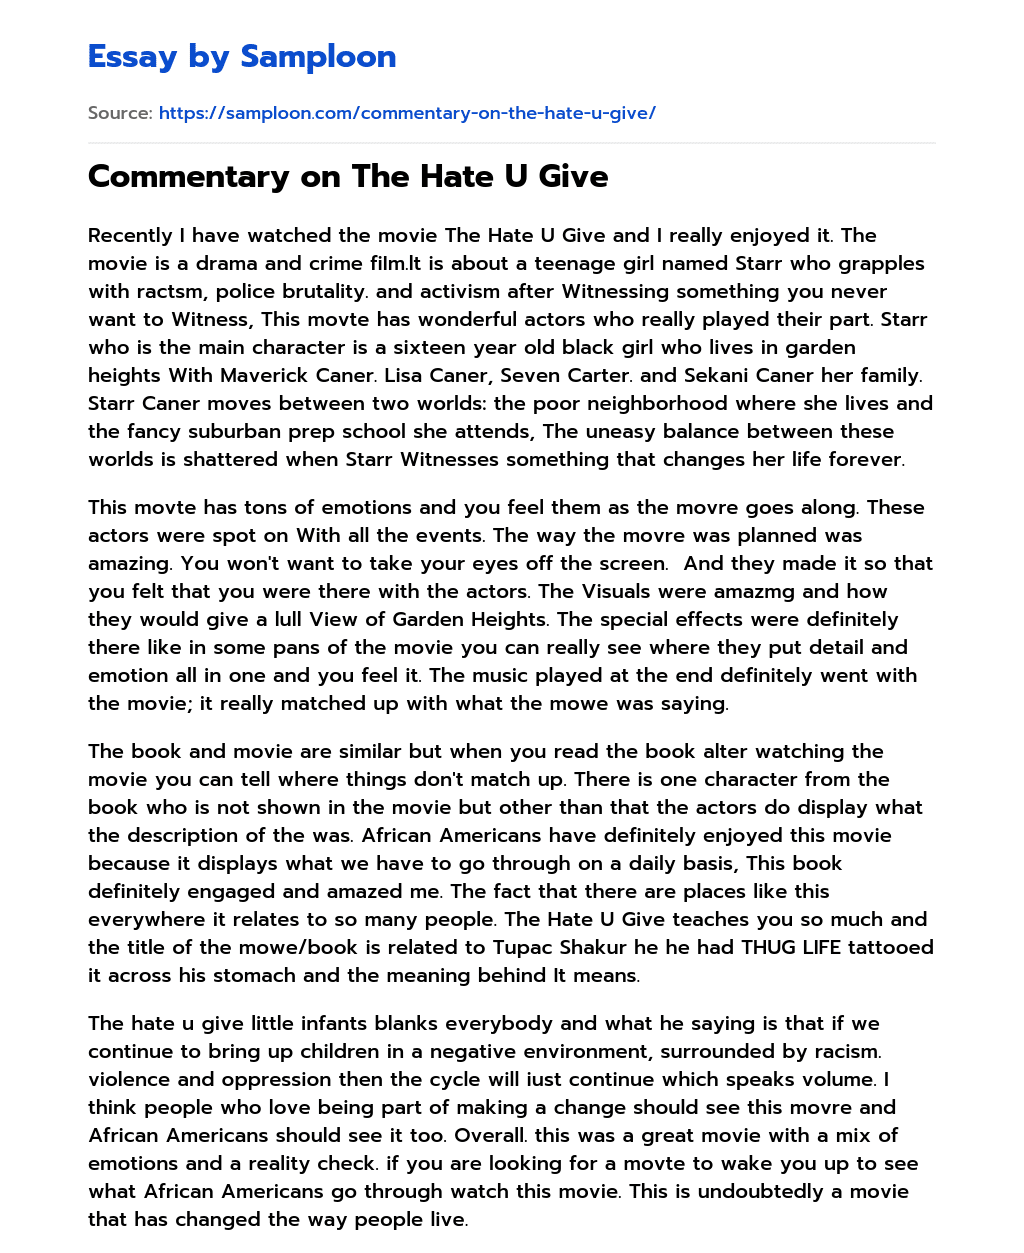 Commentary on The Hate U Give essay